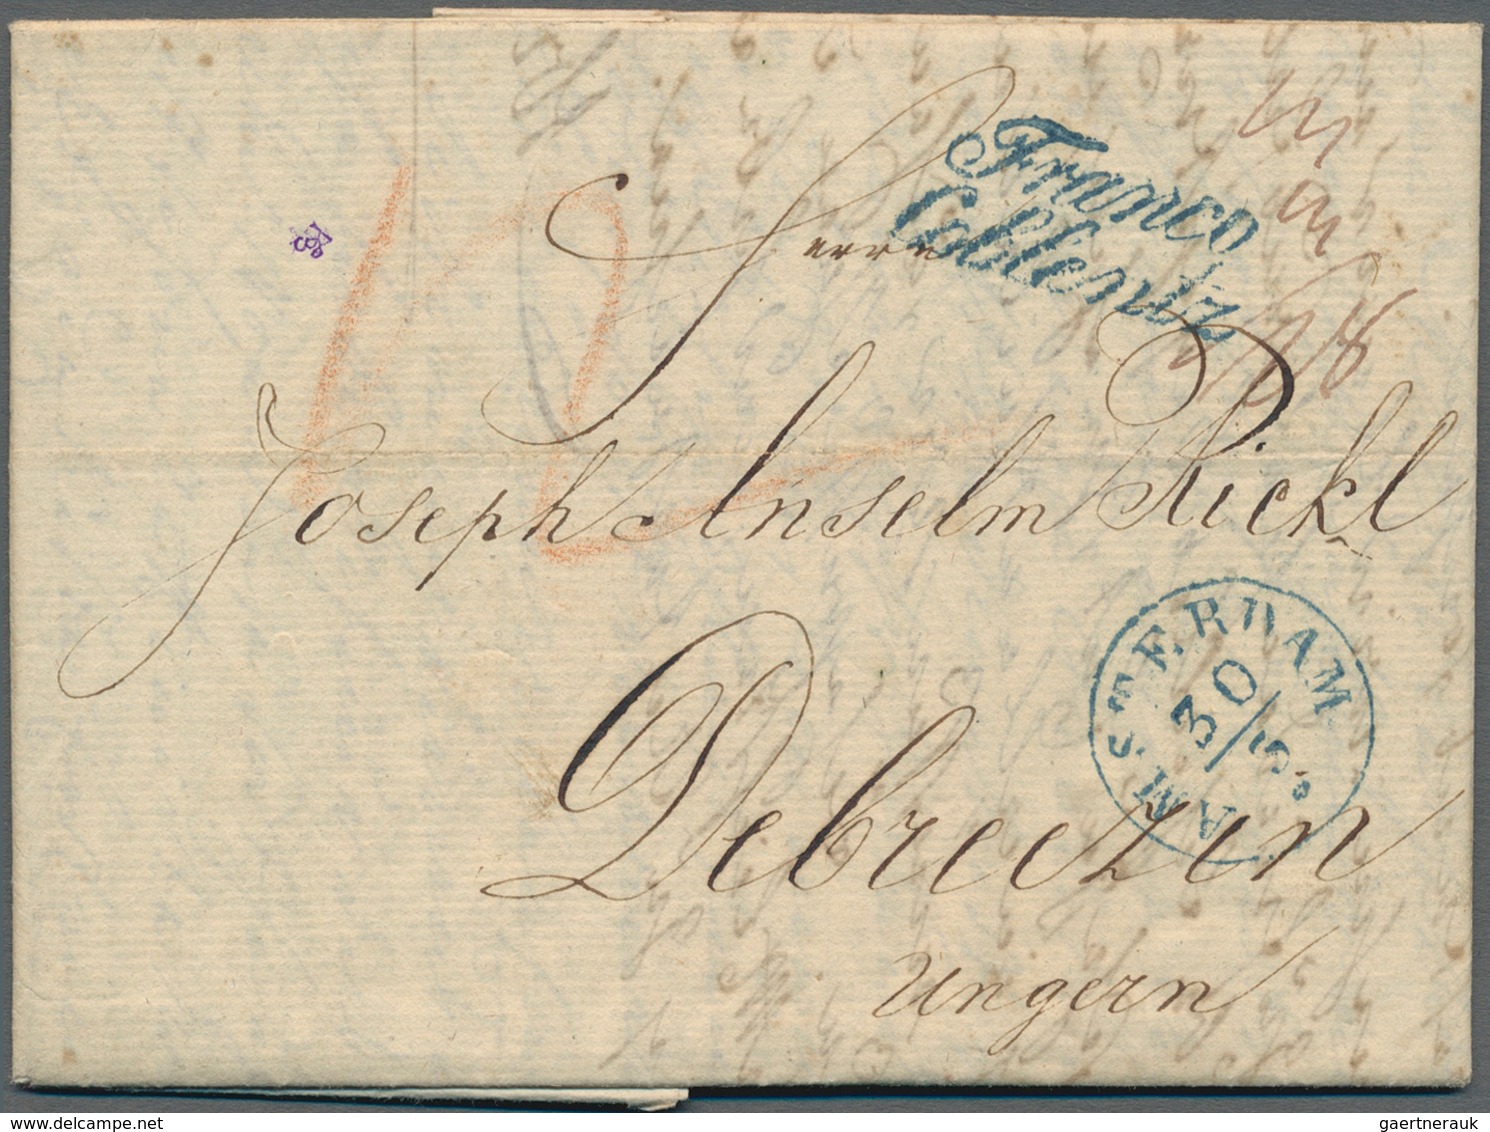 Alle Welt: 1590/1870 ca., PREPHILATELY, comprehensive collection with ca.200 entire letters, compris